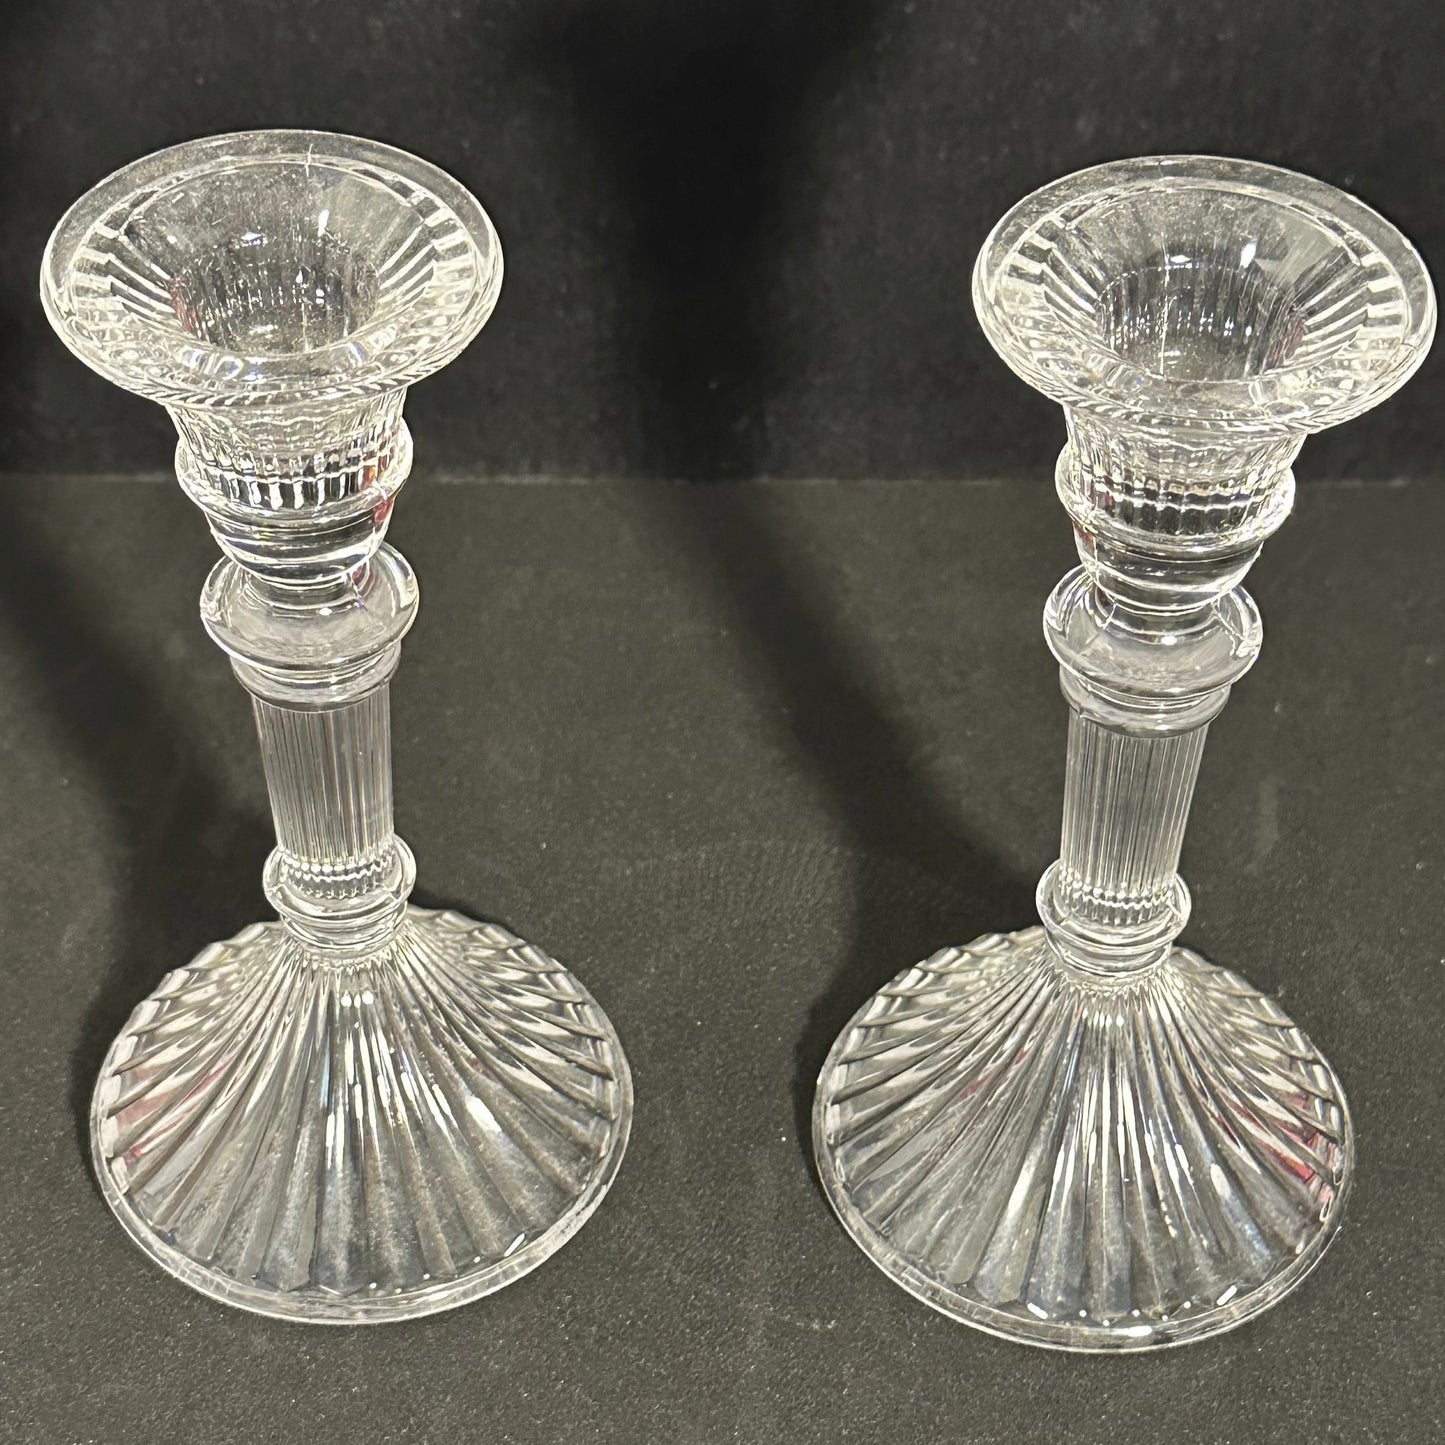 Towle Old Colonial Consoles Crystal Candlesticks